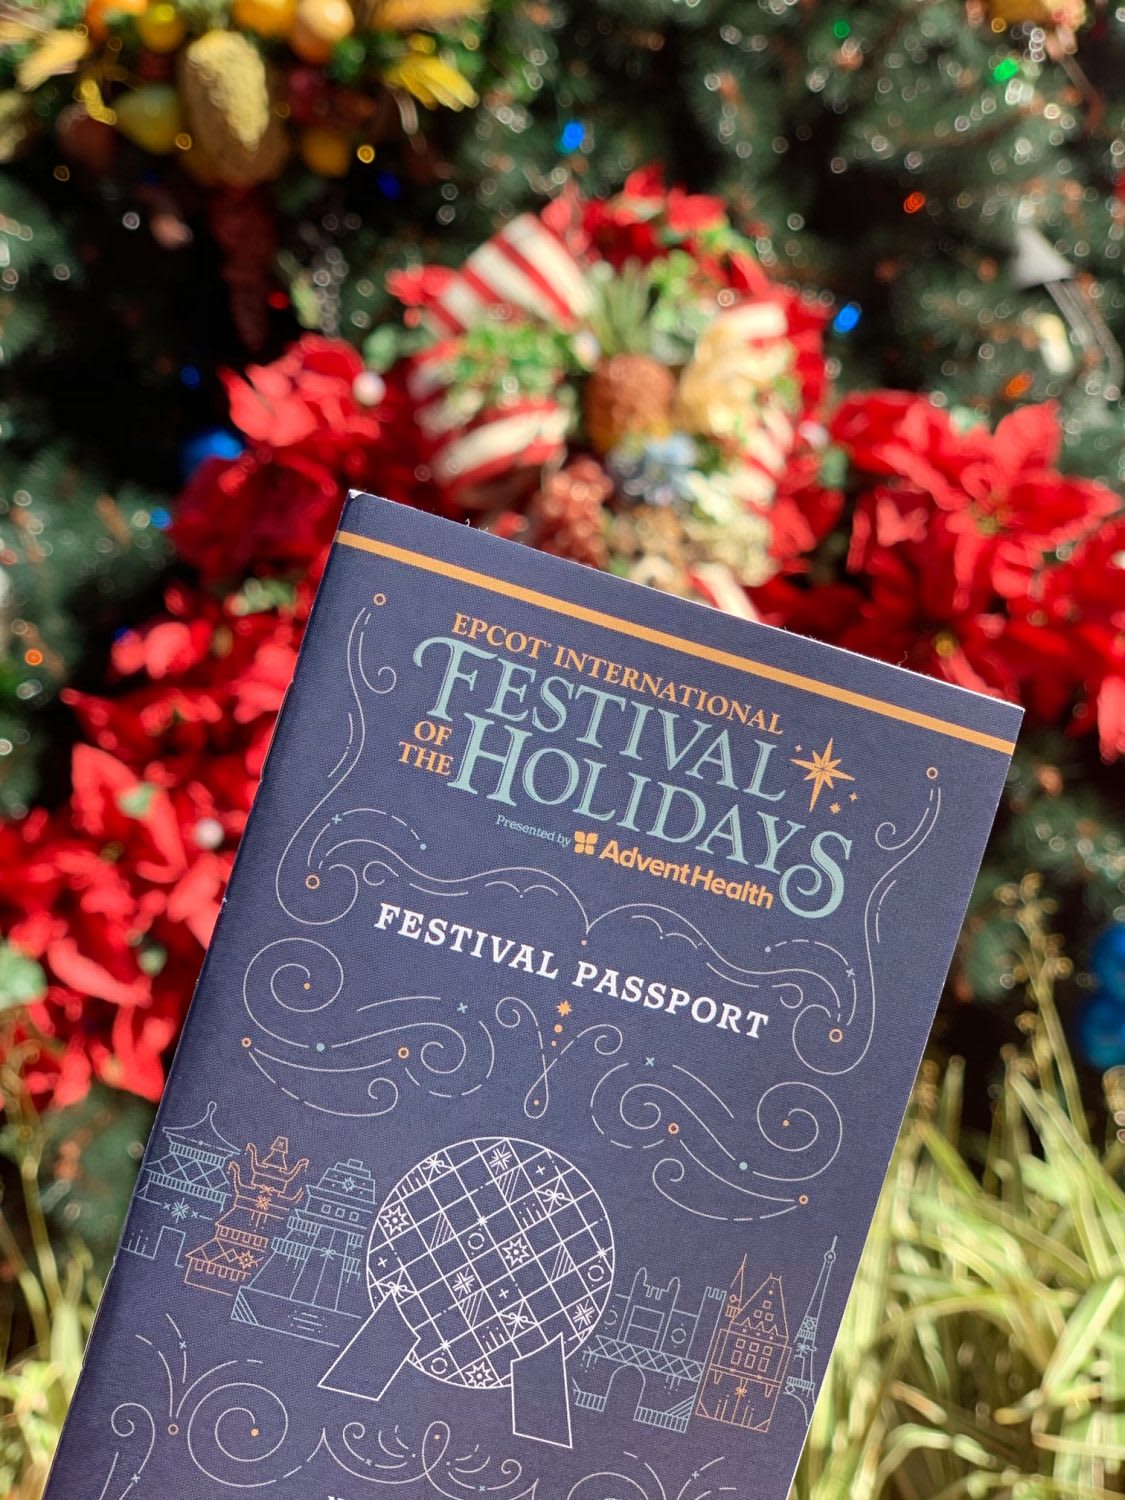 2019 Epcot International Festival of the Holidays Cookie Stroll